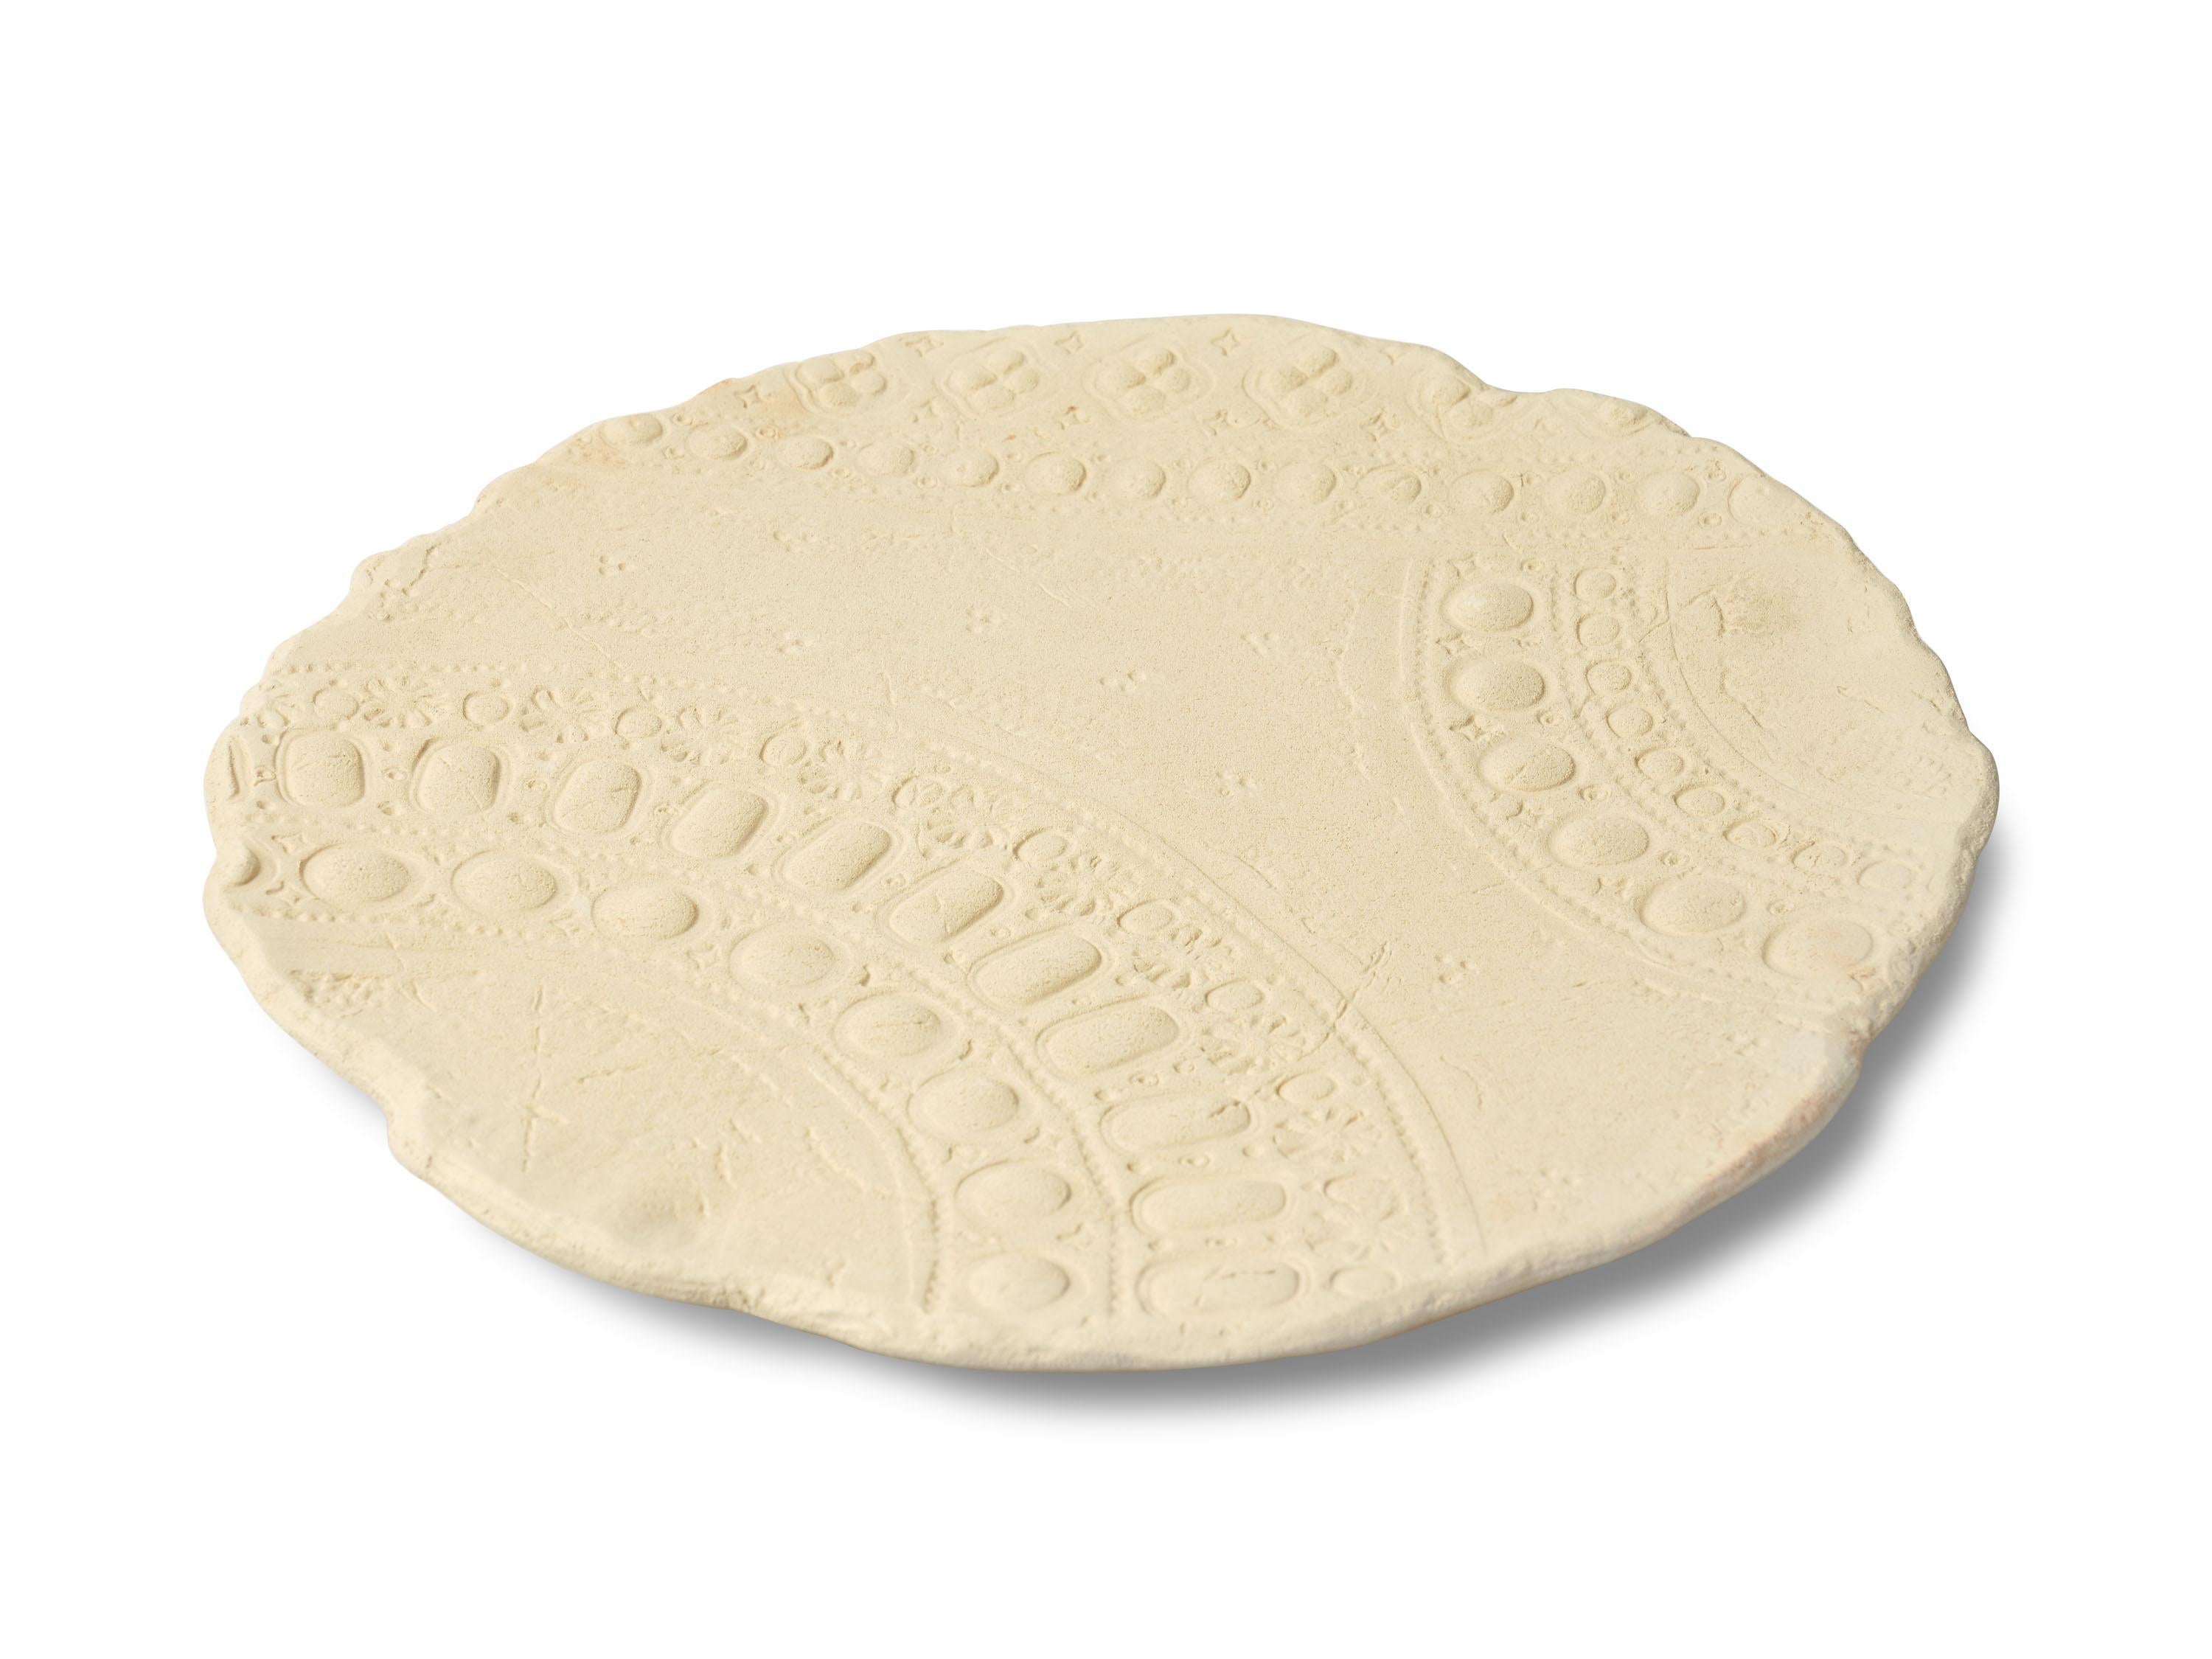 Decorative plate in fireclay, entirely handmade in Italy. The incredibly material finish has been left natural to highlight the beauty and uniqueness of this clay. The whiteness of its color is reminiscent of something ancient, consumed by the sea